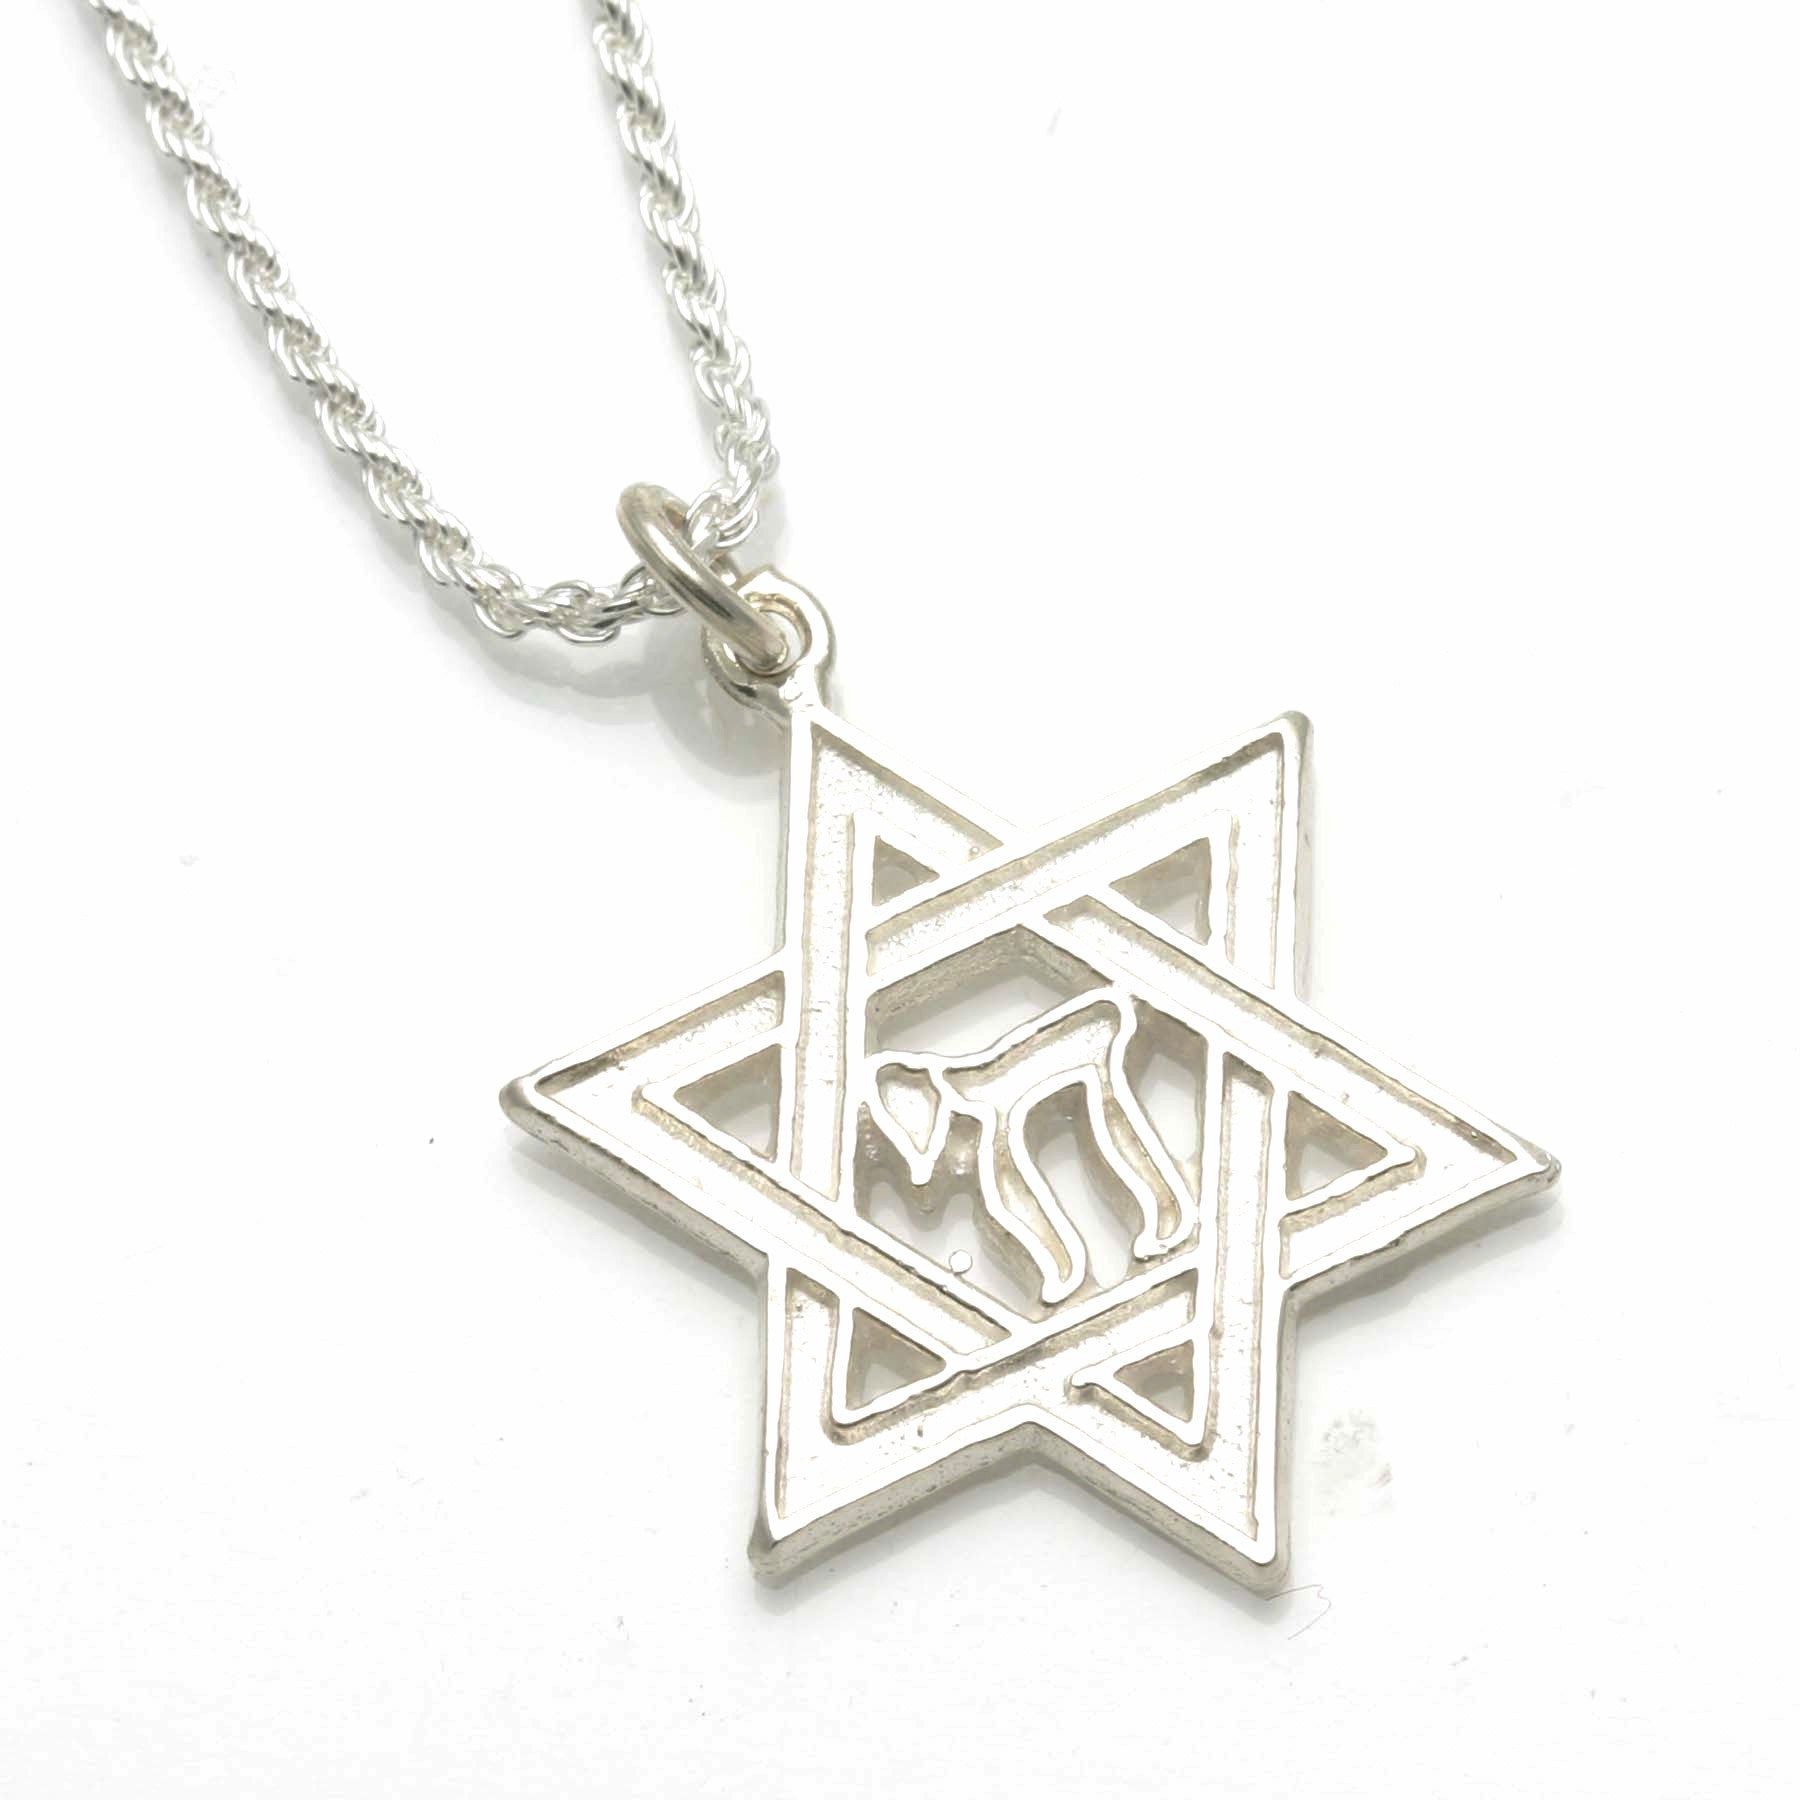 Sterling Silver Rope Chain - JewelryJudaica